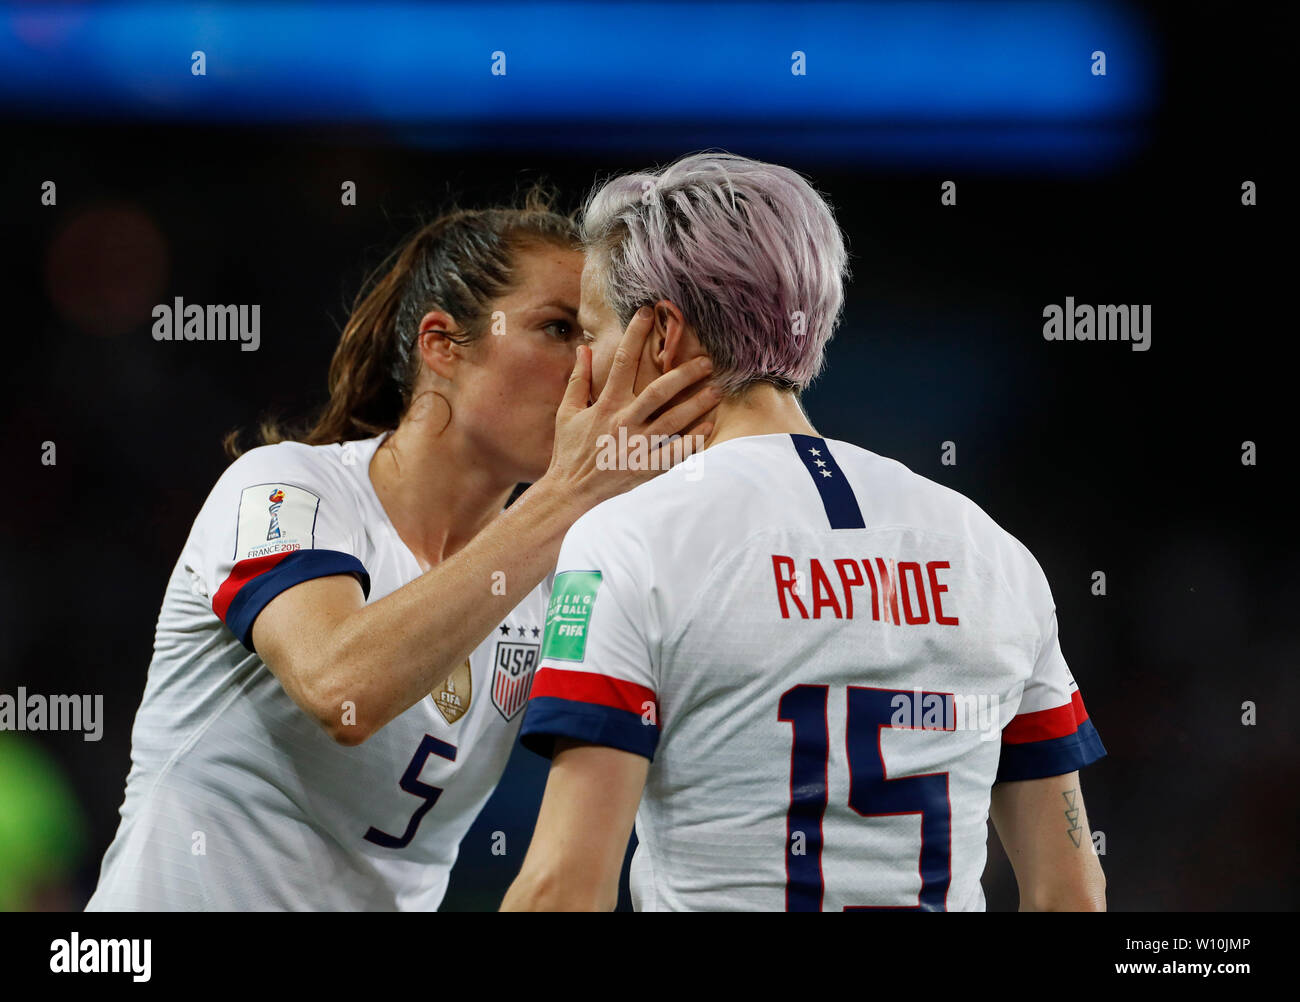 paris-france-28th-june-2019-megan-rapinoe-r-of-the-united-states-celebrates-after-scoring-with-teammate-kelley-o-hara-during-the-quarterfinal-match-between-france-and-the-united-states-at-the-2019-fifa-womens-world-cup-at-parc-des-princes-in-paris-france-june-28-2019-the-united-states-won-2-1-credit-ding-xuxinhuaalamy-live-news-W10JMP.jpg